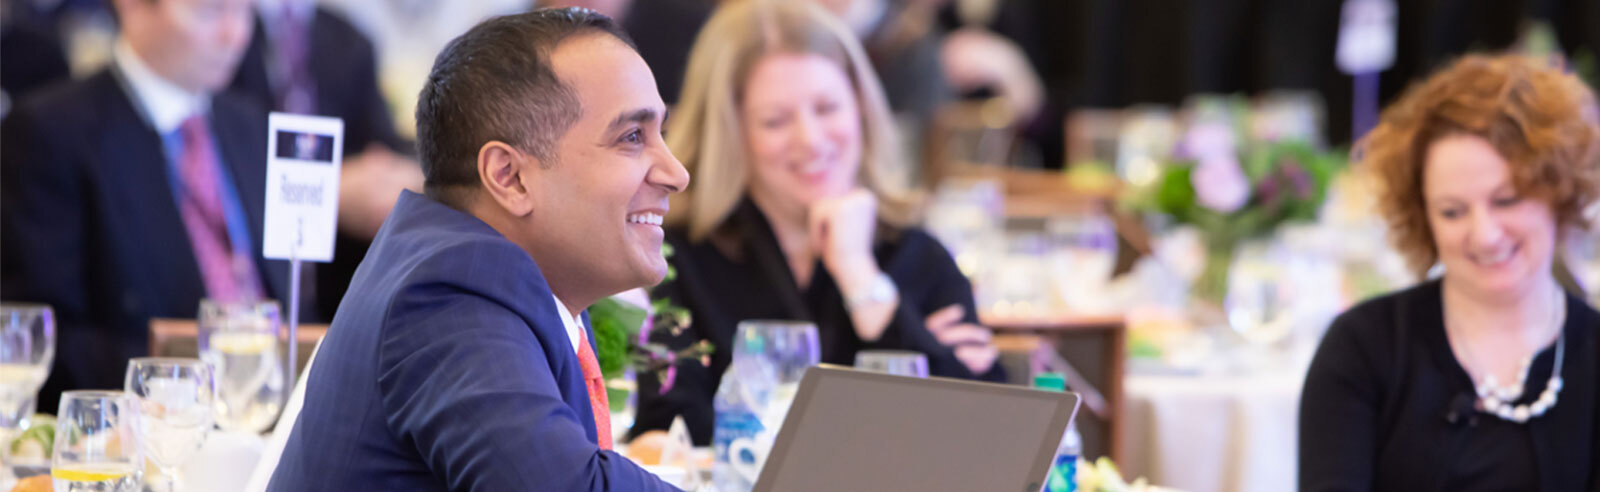 Harvard alumnus Sachin H. Jain is seated with other speakers at the 2019 Fusion symposium. Image credit Russ Campbell.